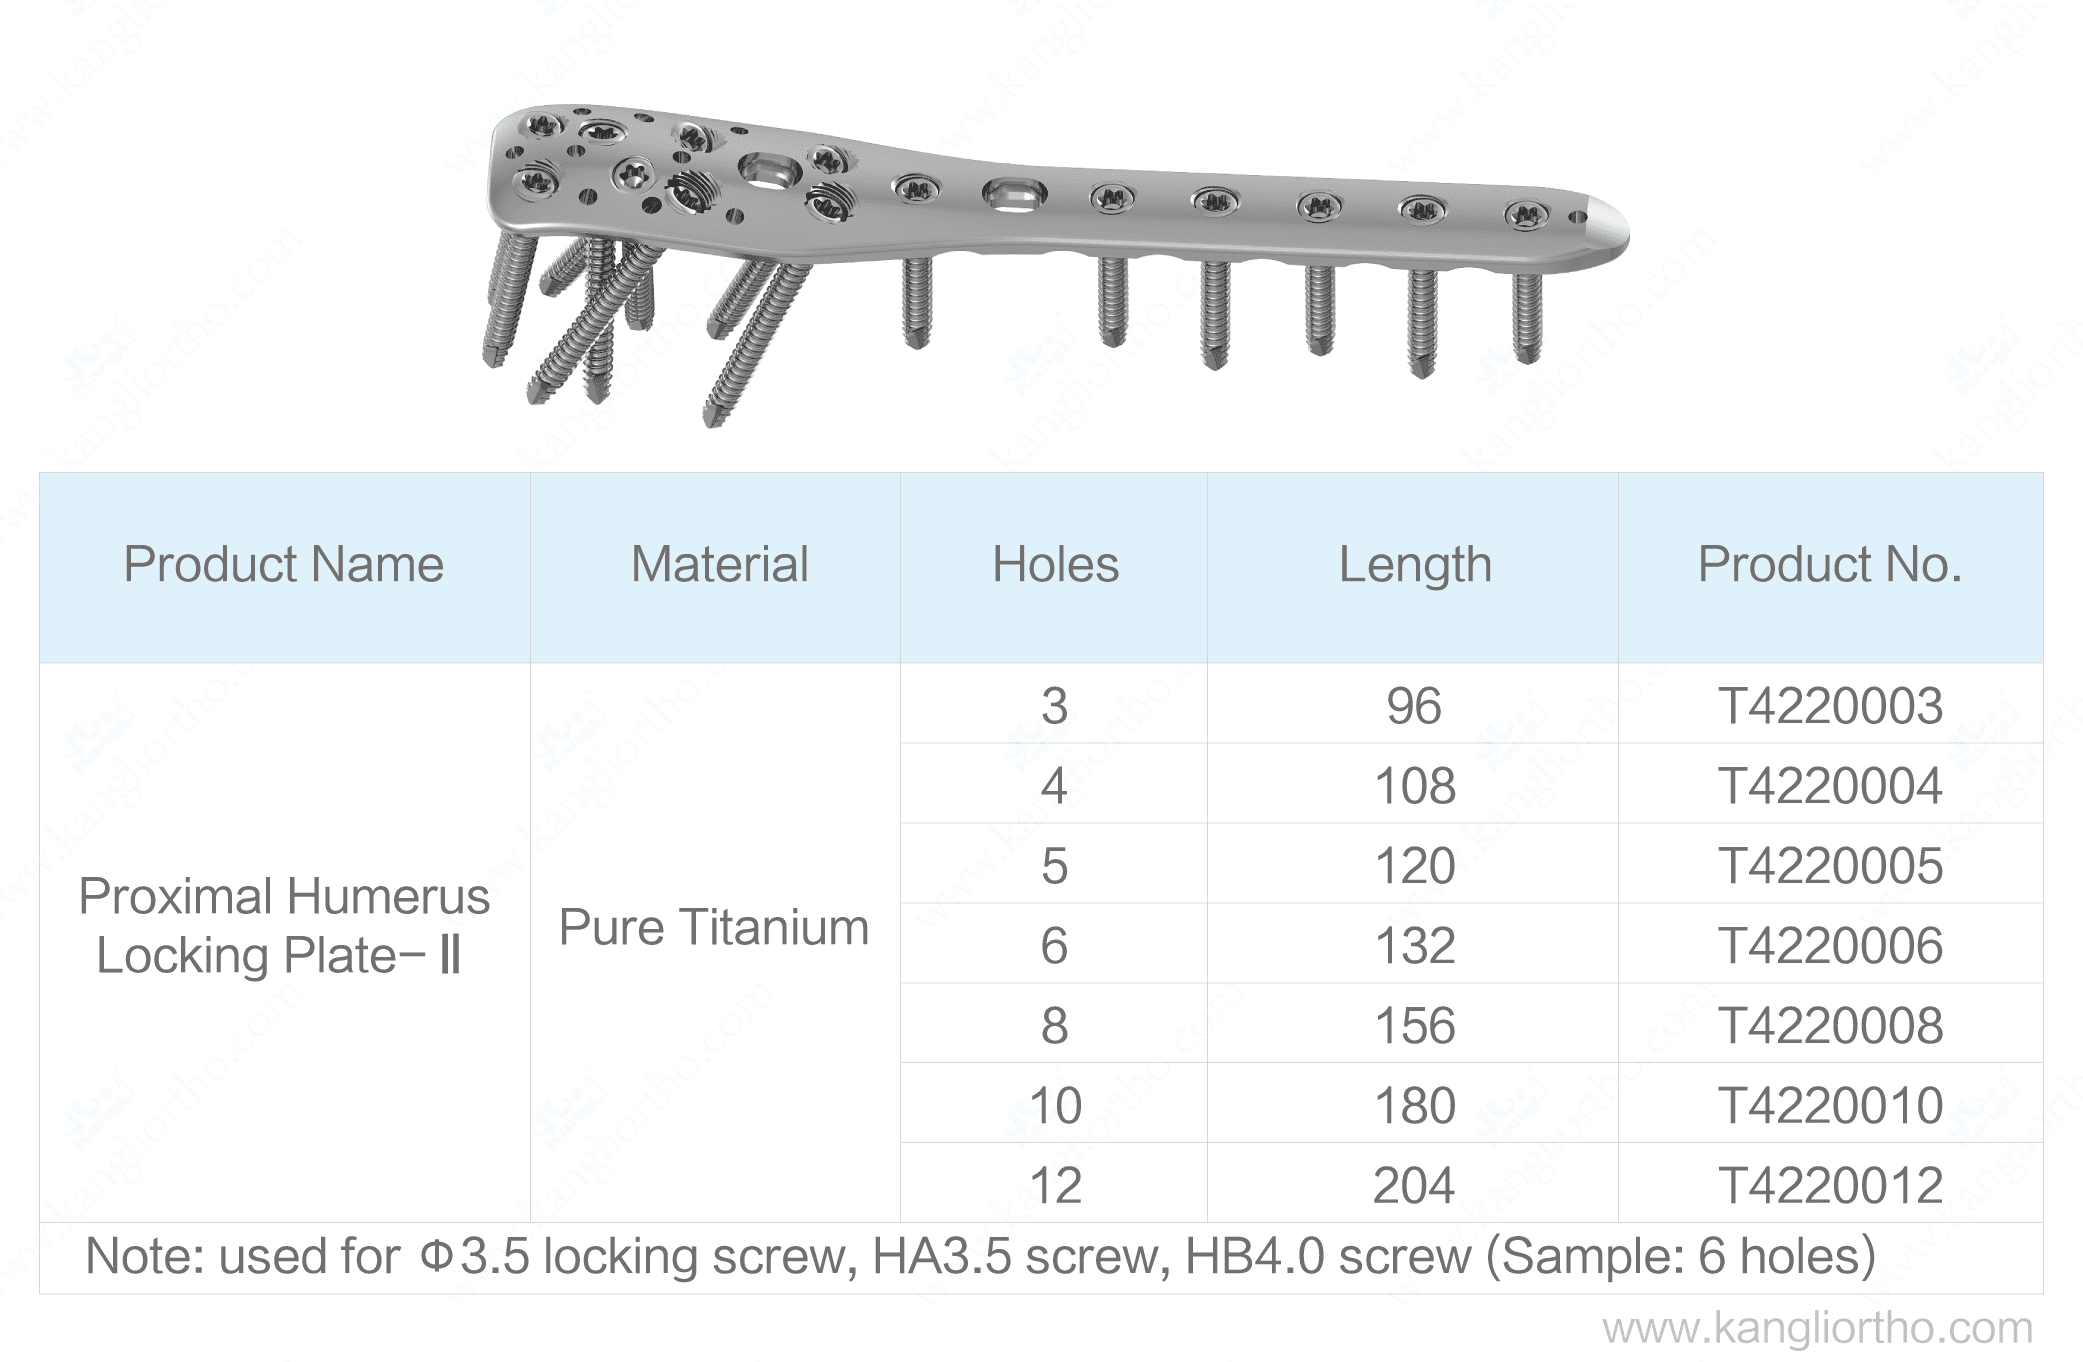 proximal-humerus-locking-plate-ii-specifications